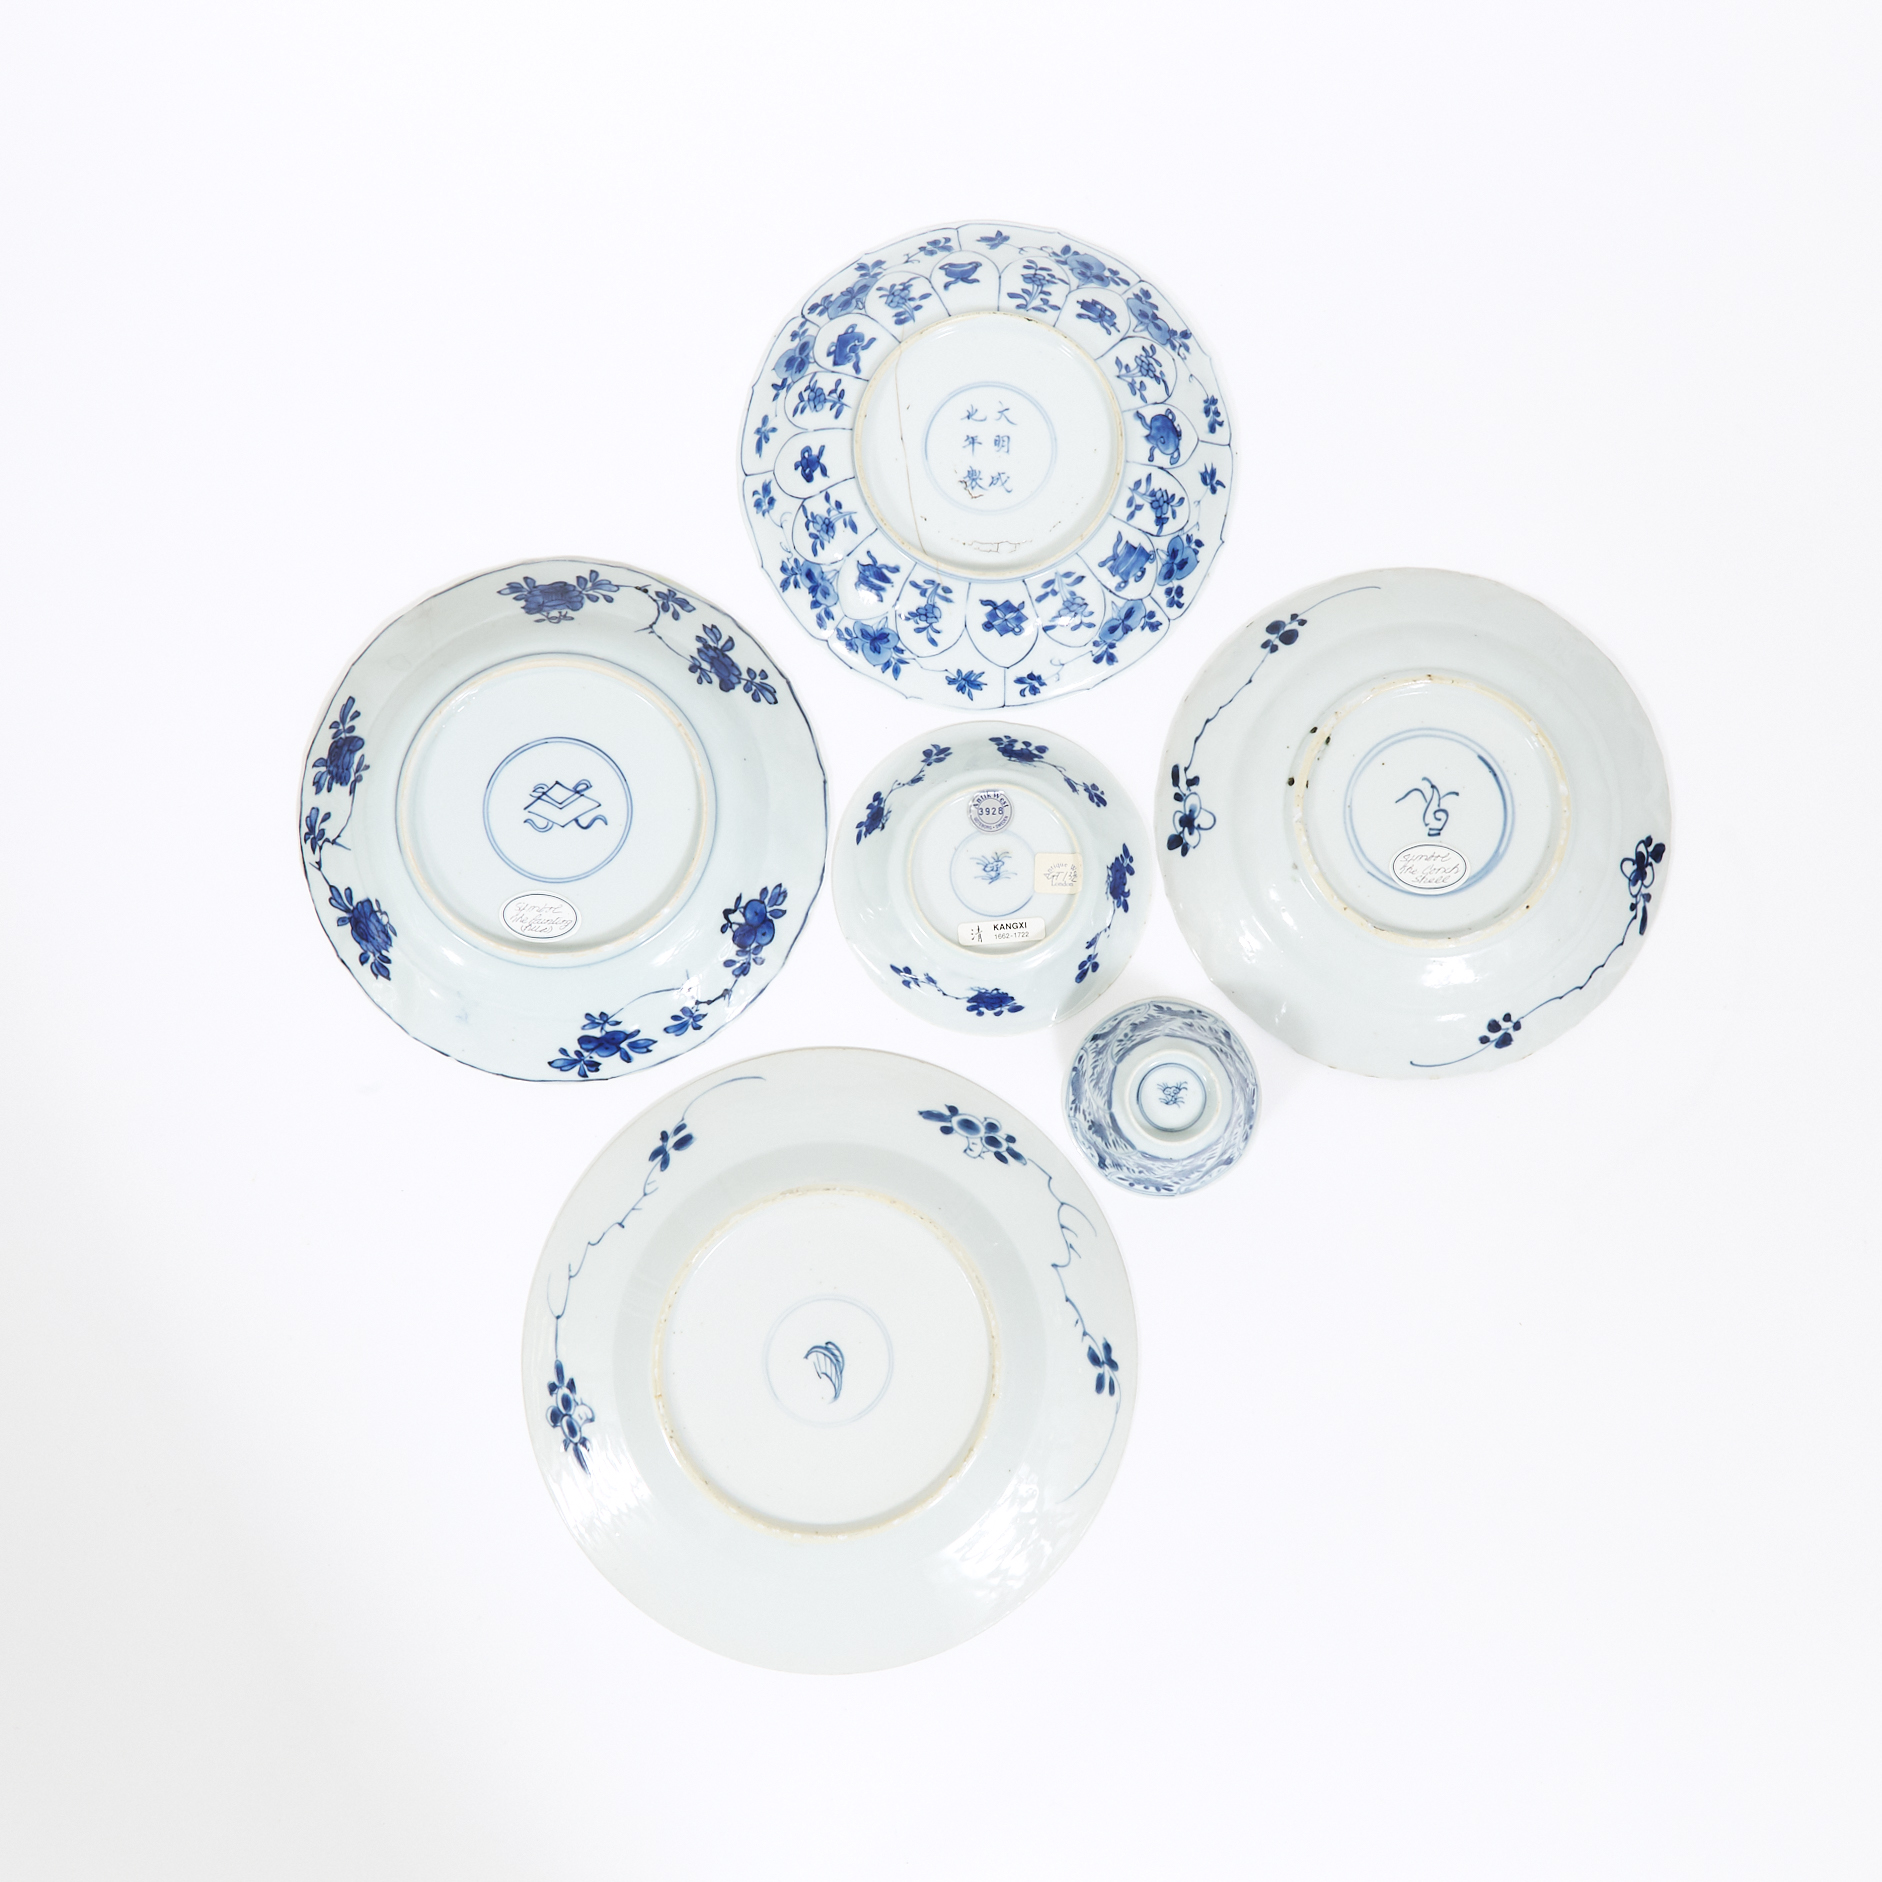 A Group of Six Export Blue and White Wares, Kangxi Period, Qing Dynasty